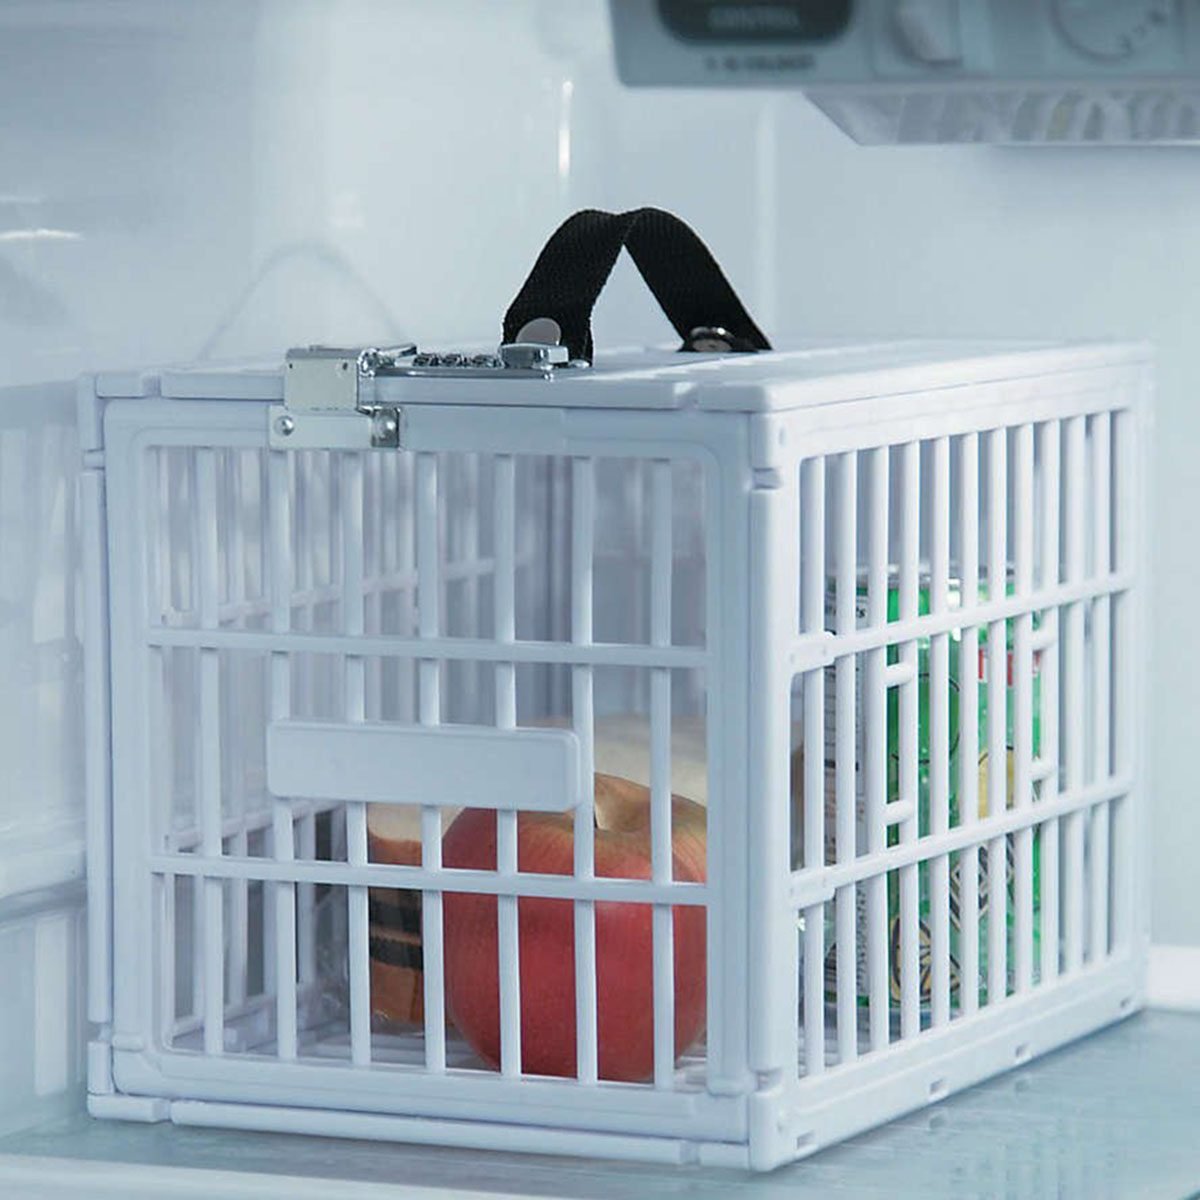 A Fridge Locker and 9 Other Ways To Protect Your Lunch at Work